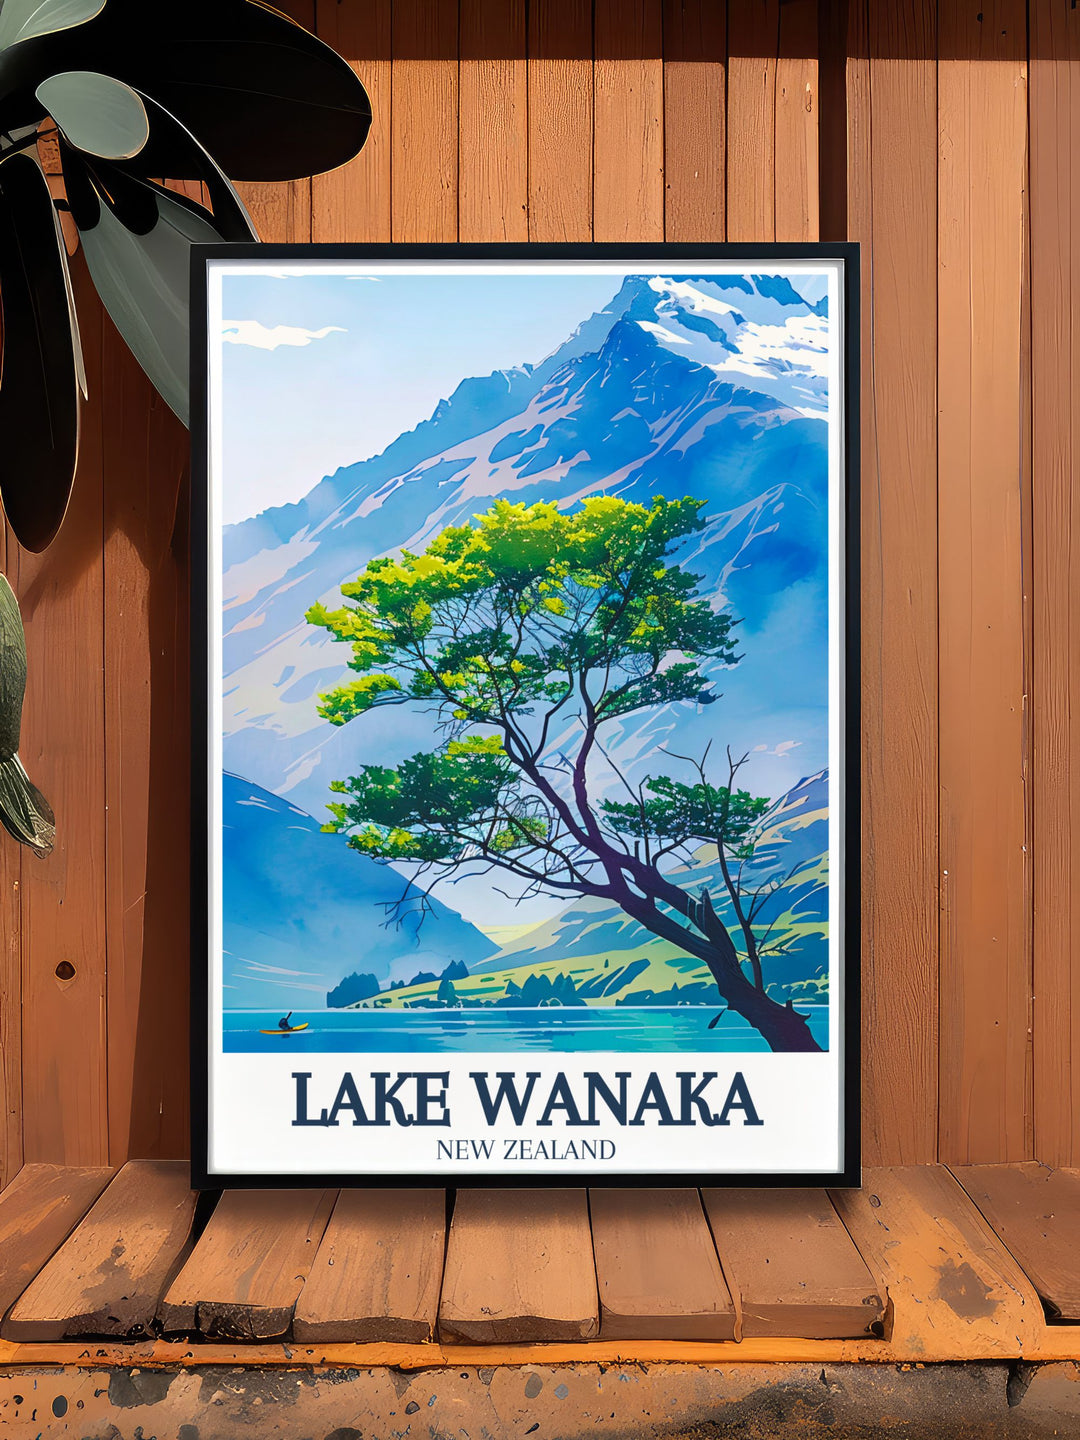 Stunning New Zealand poster of the lake wanaka tree in Mount Aspiring National Park A perfect gift for nature lovers and those who appreciate the beauty of New Zealand travel destinations